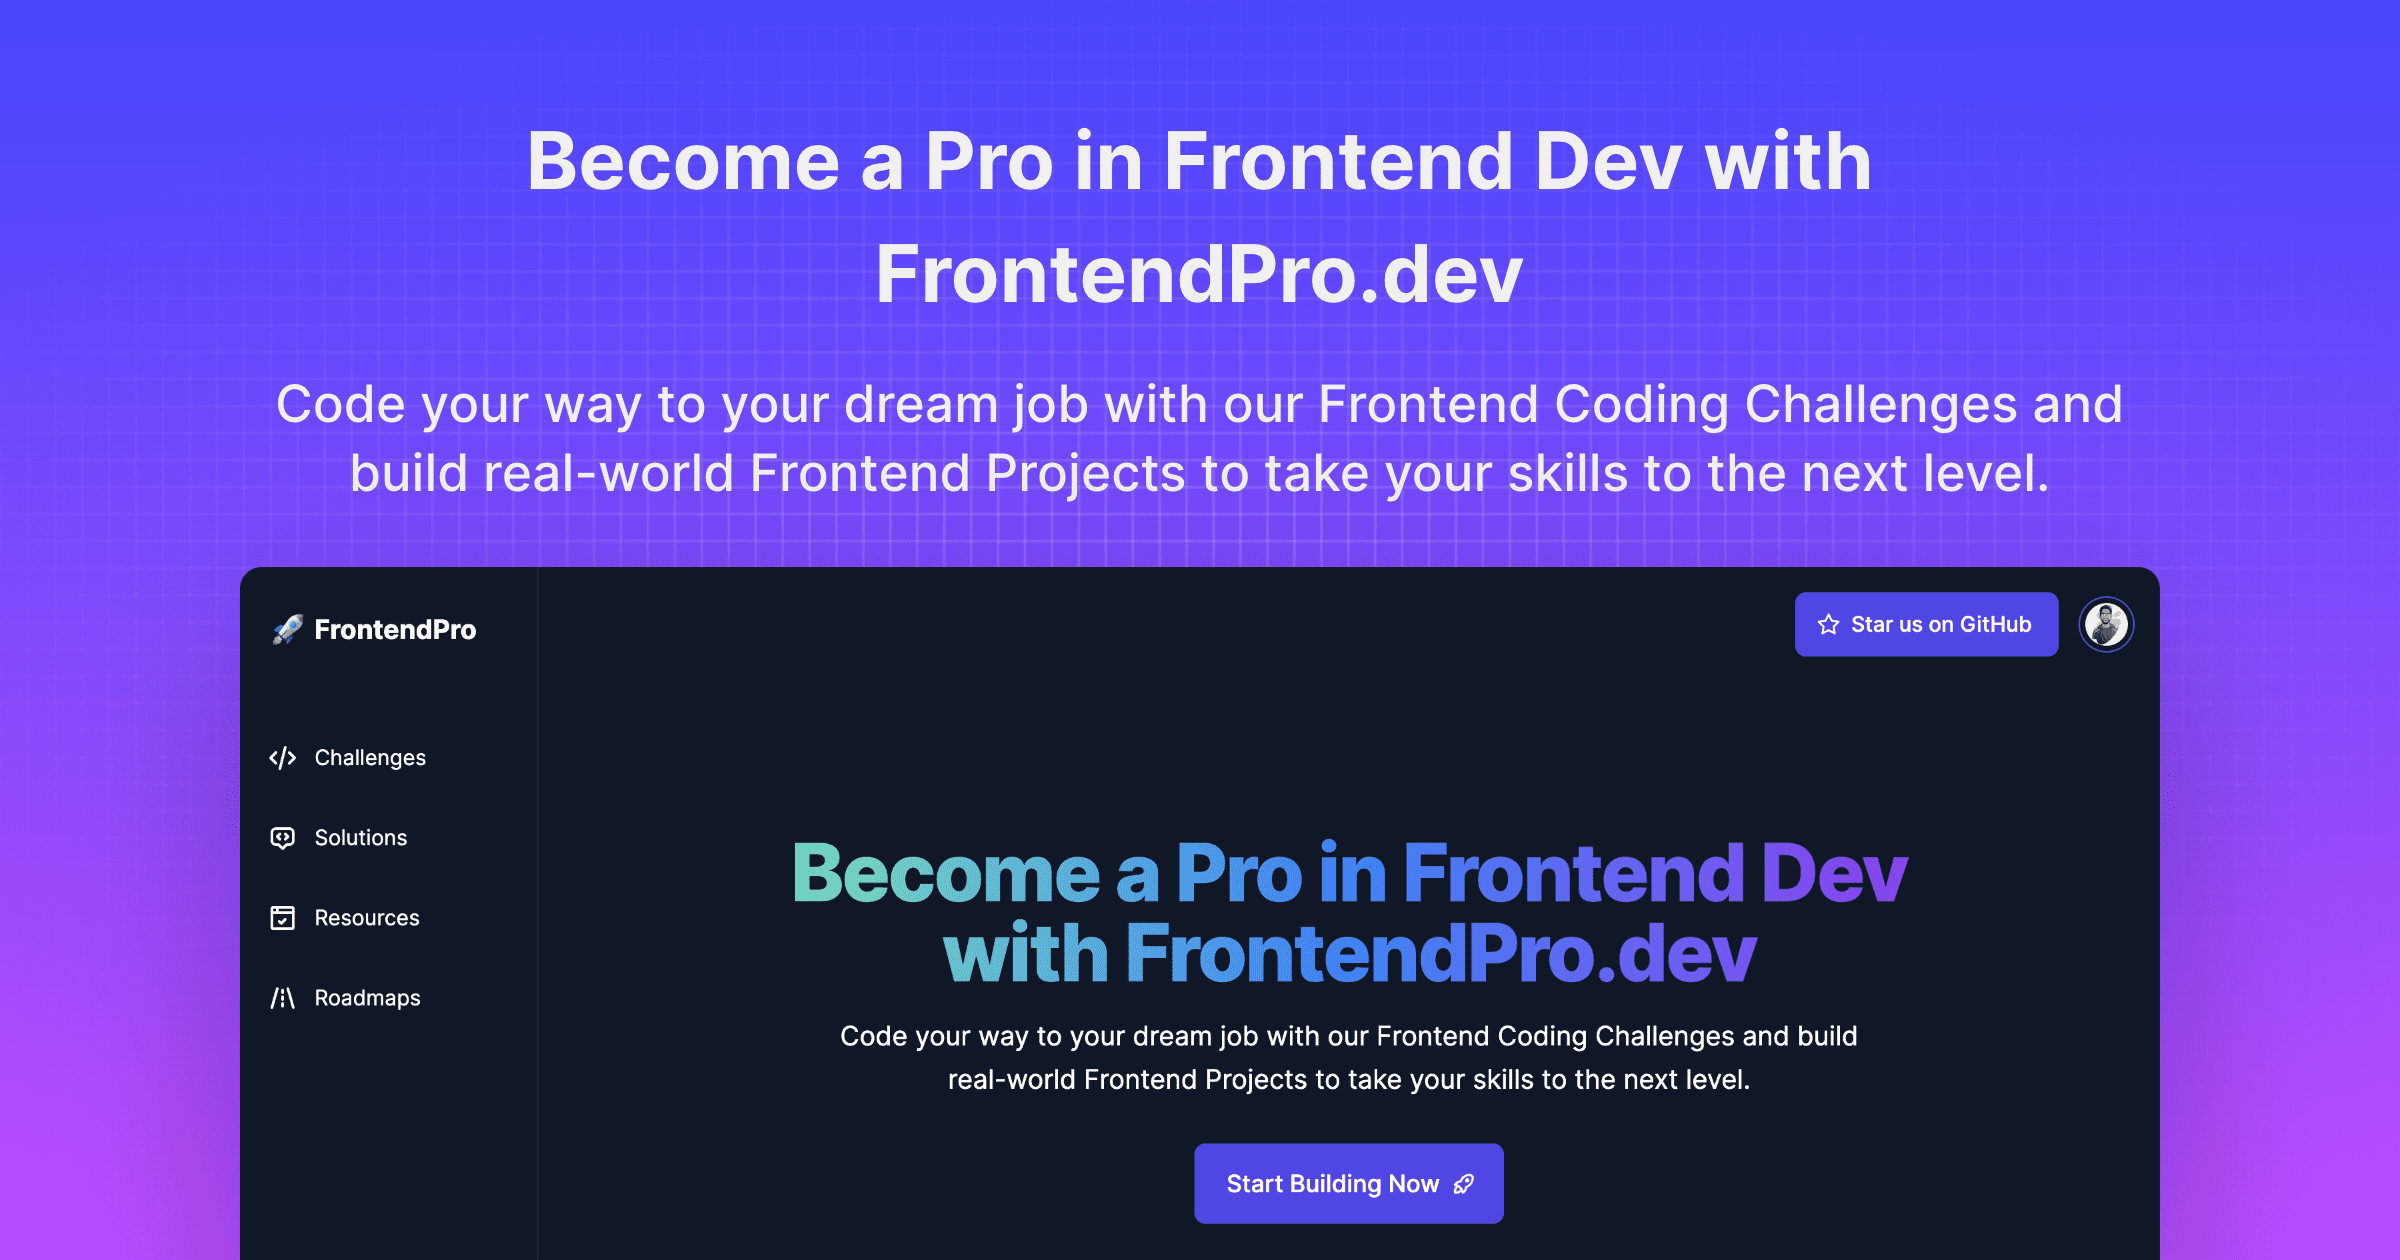 FrontendPro